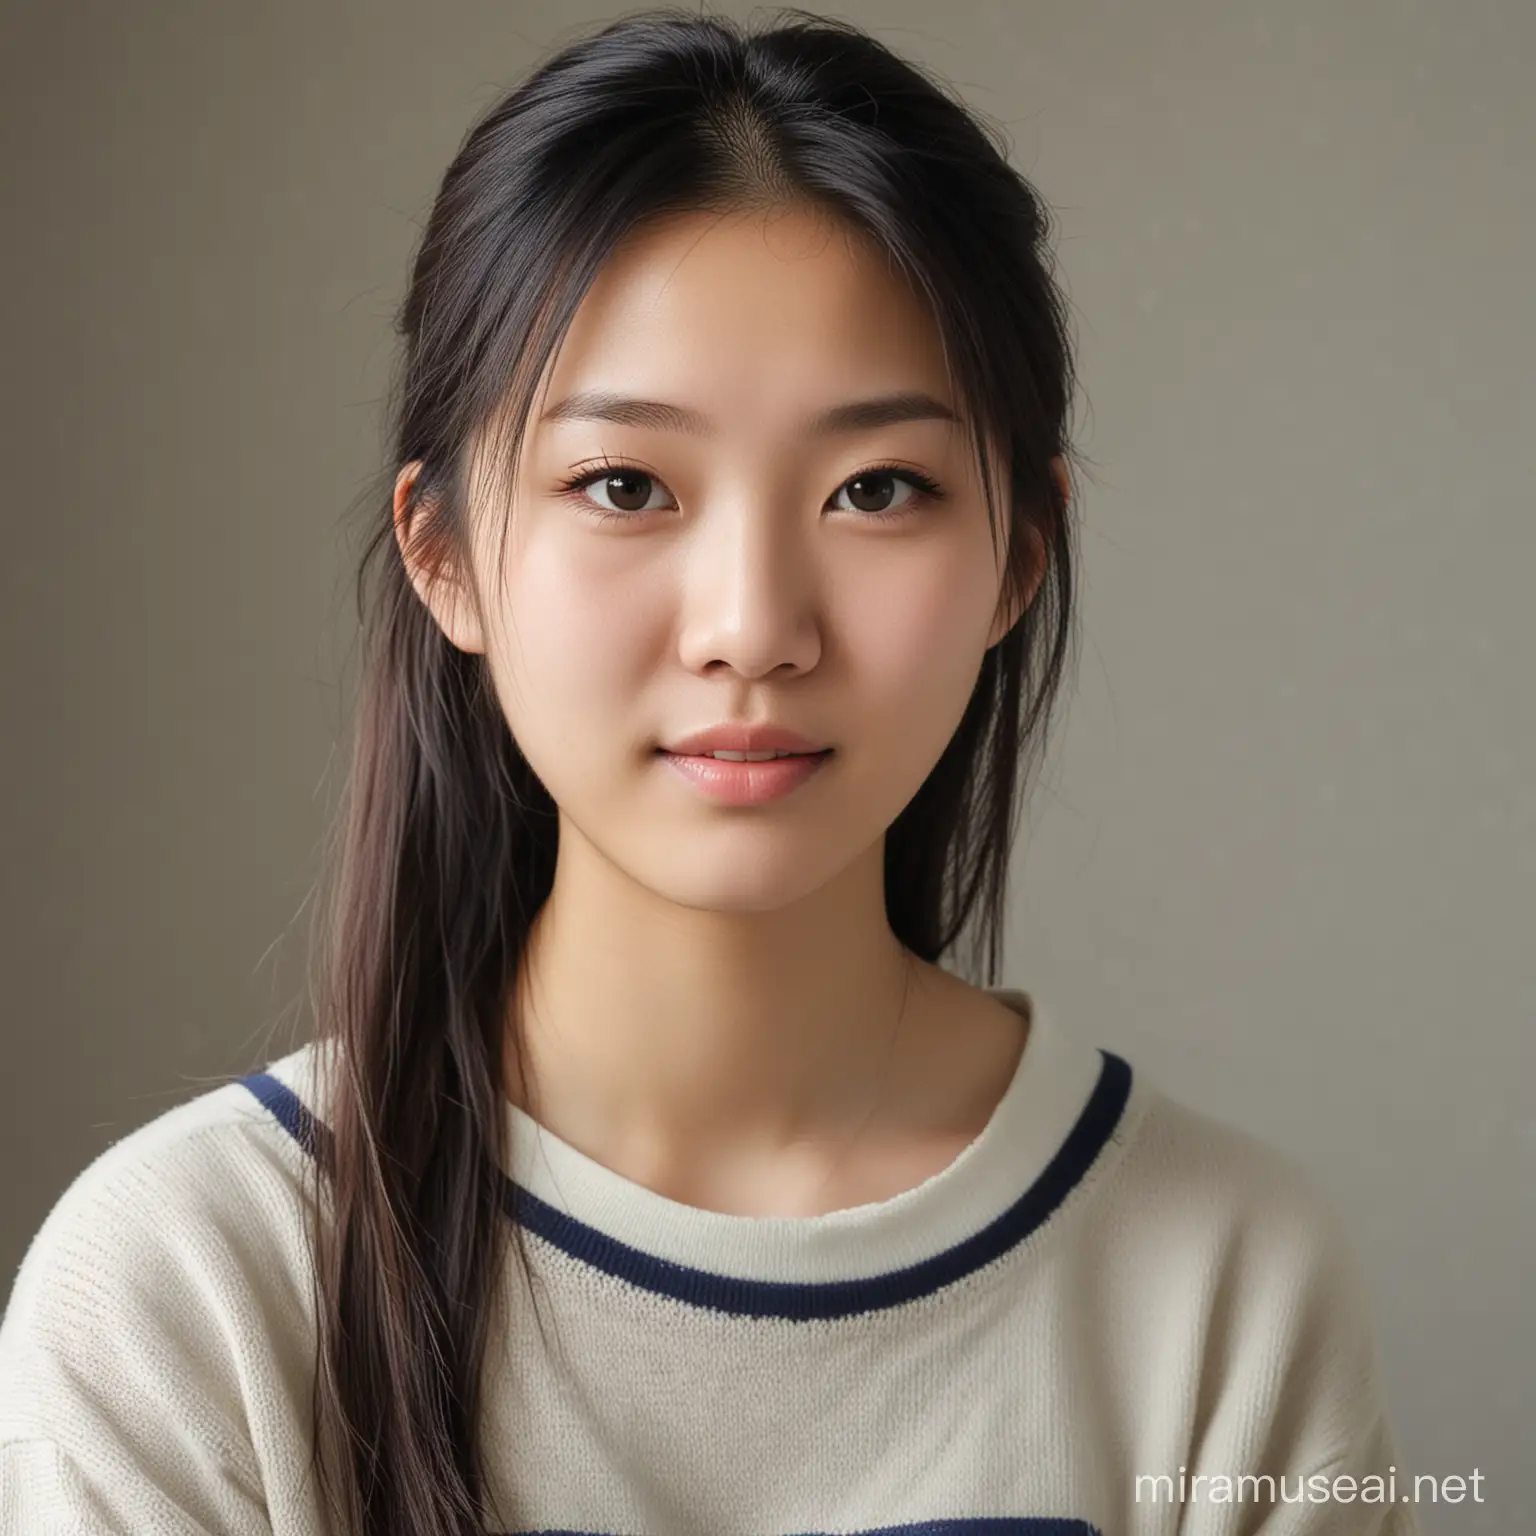 Lifelike Portrait of a Chinese College Student Authentic 20YearOld Asian Girl